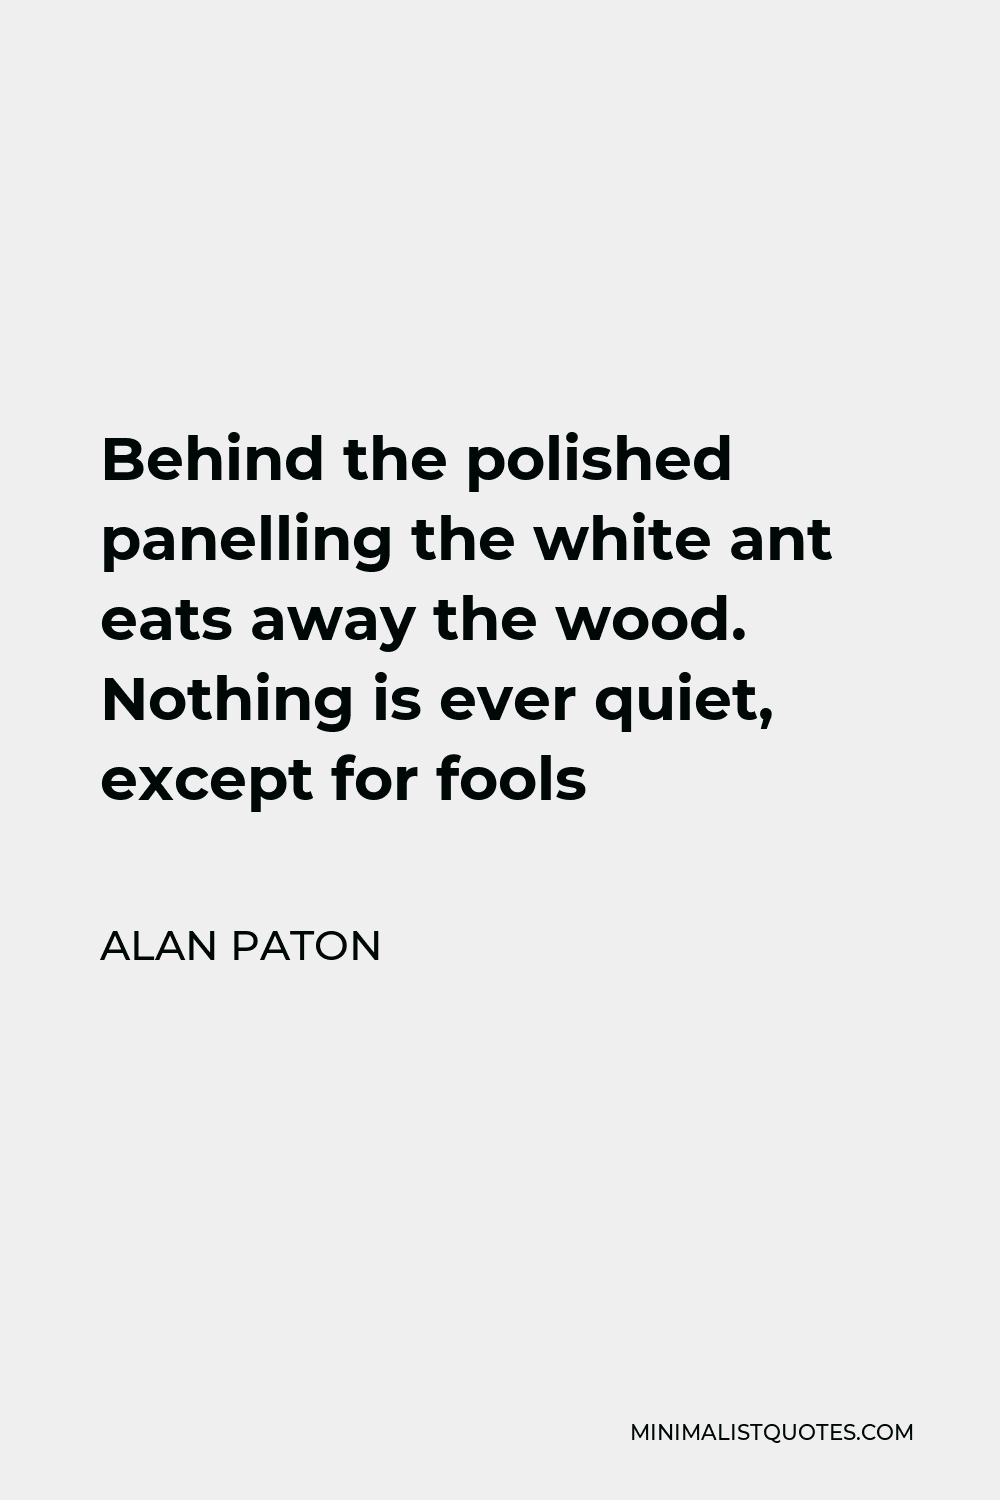 Alan Paton Quote - Behind the polished panelling the white ant eats away the wood. Nothing is ever quiet, except for fools